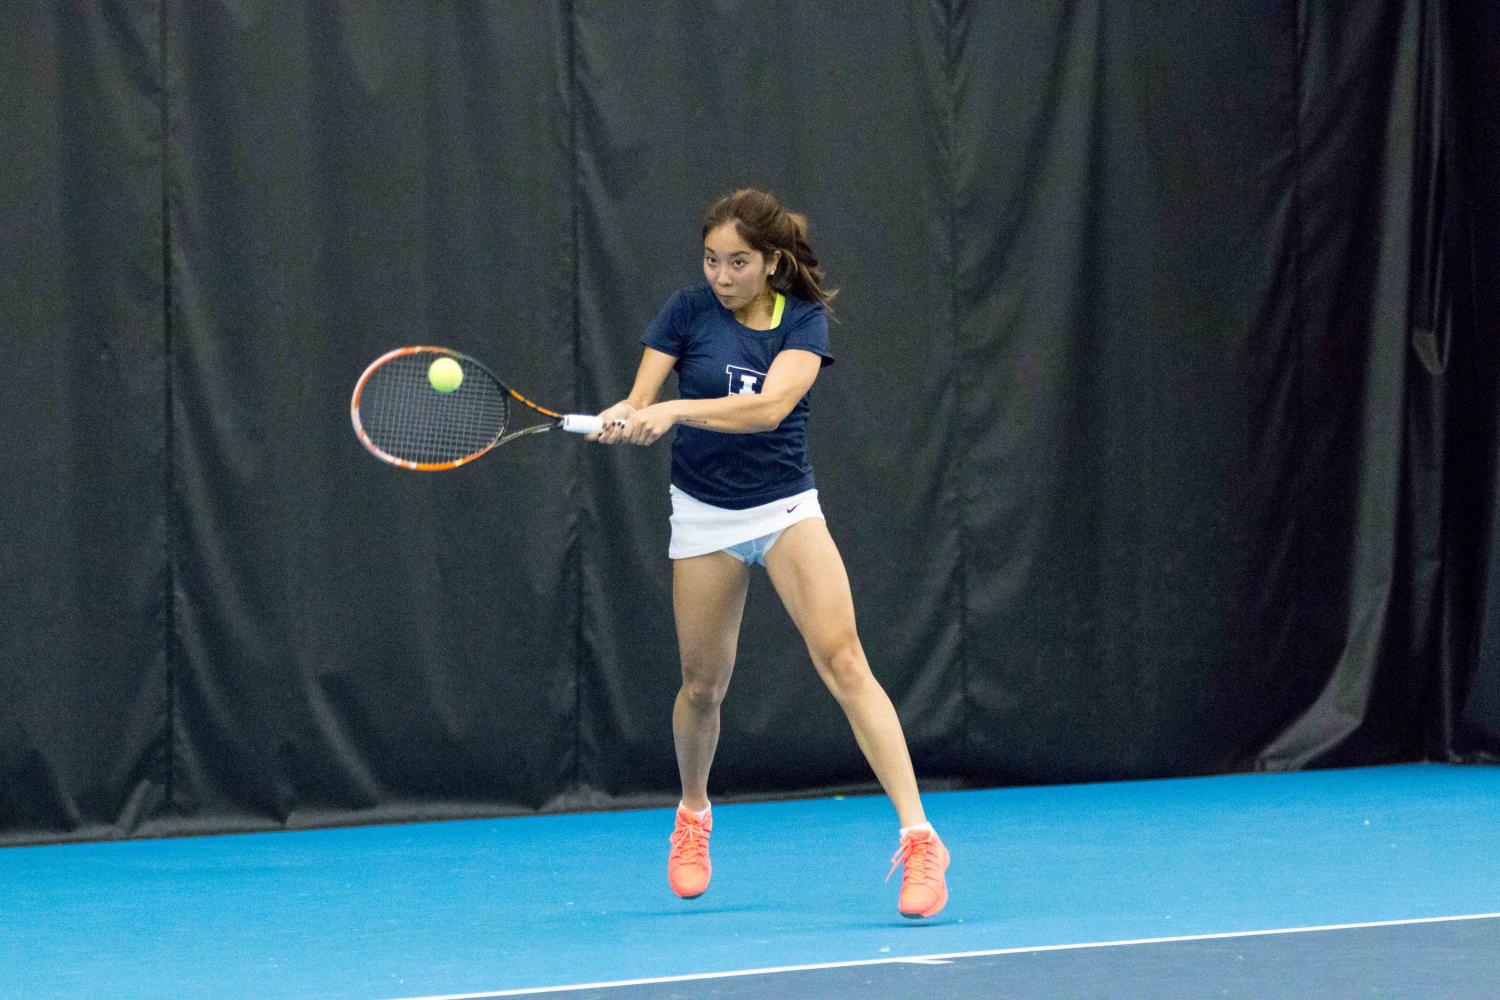 Illinois++Louise+Kwong+returns+the+ball+during+the+match+against+DePaul+at+the+Atkins+Tennis+Center+on+February+19.